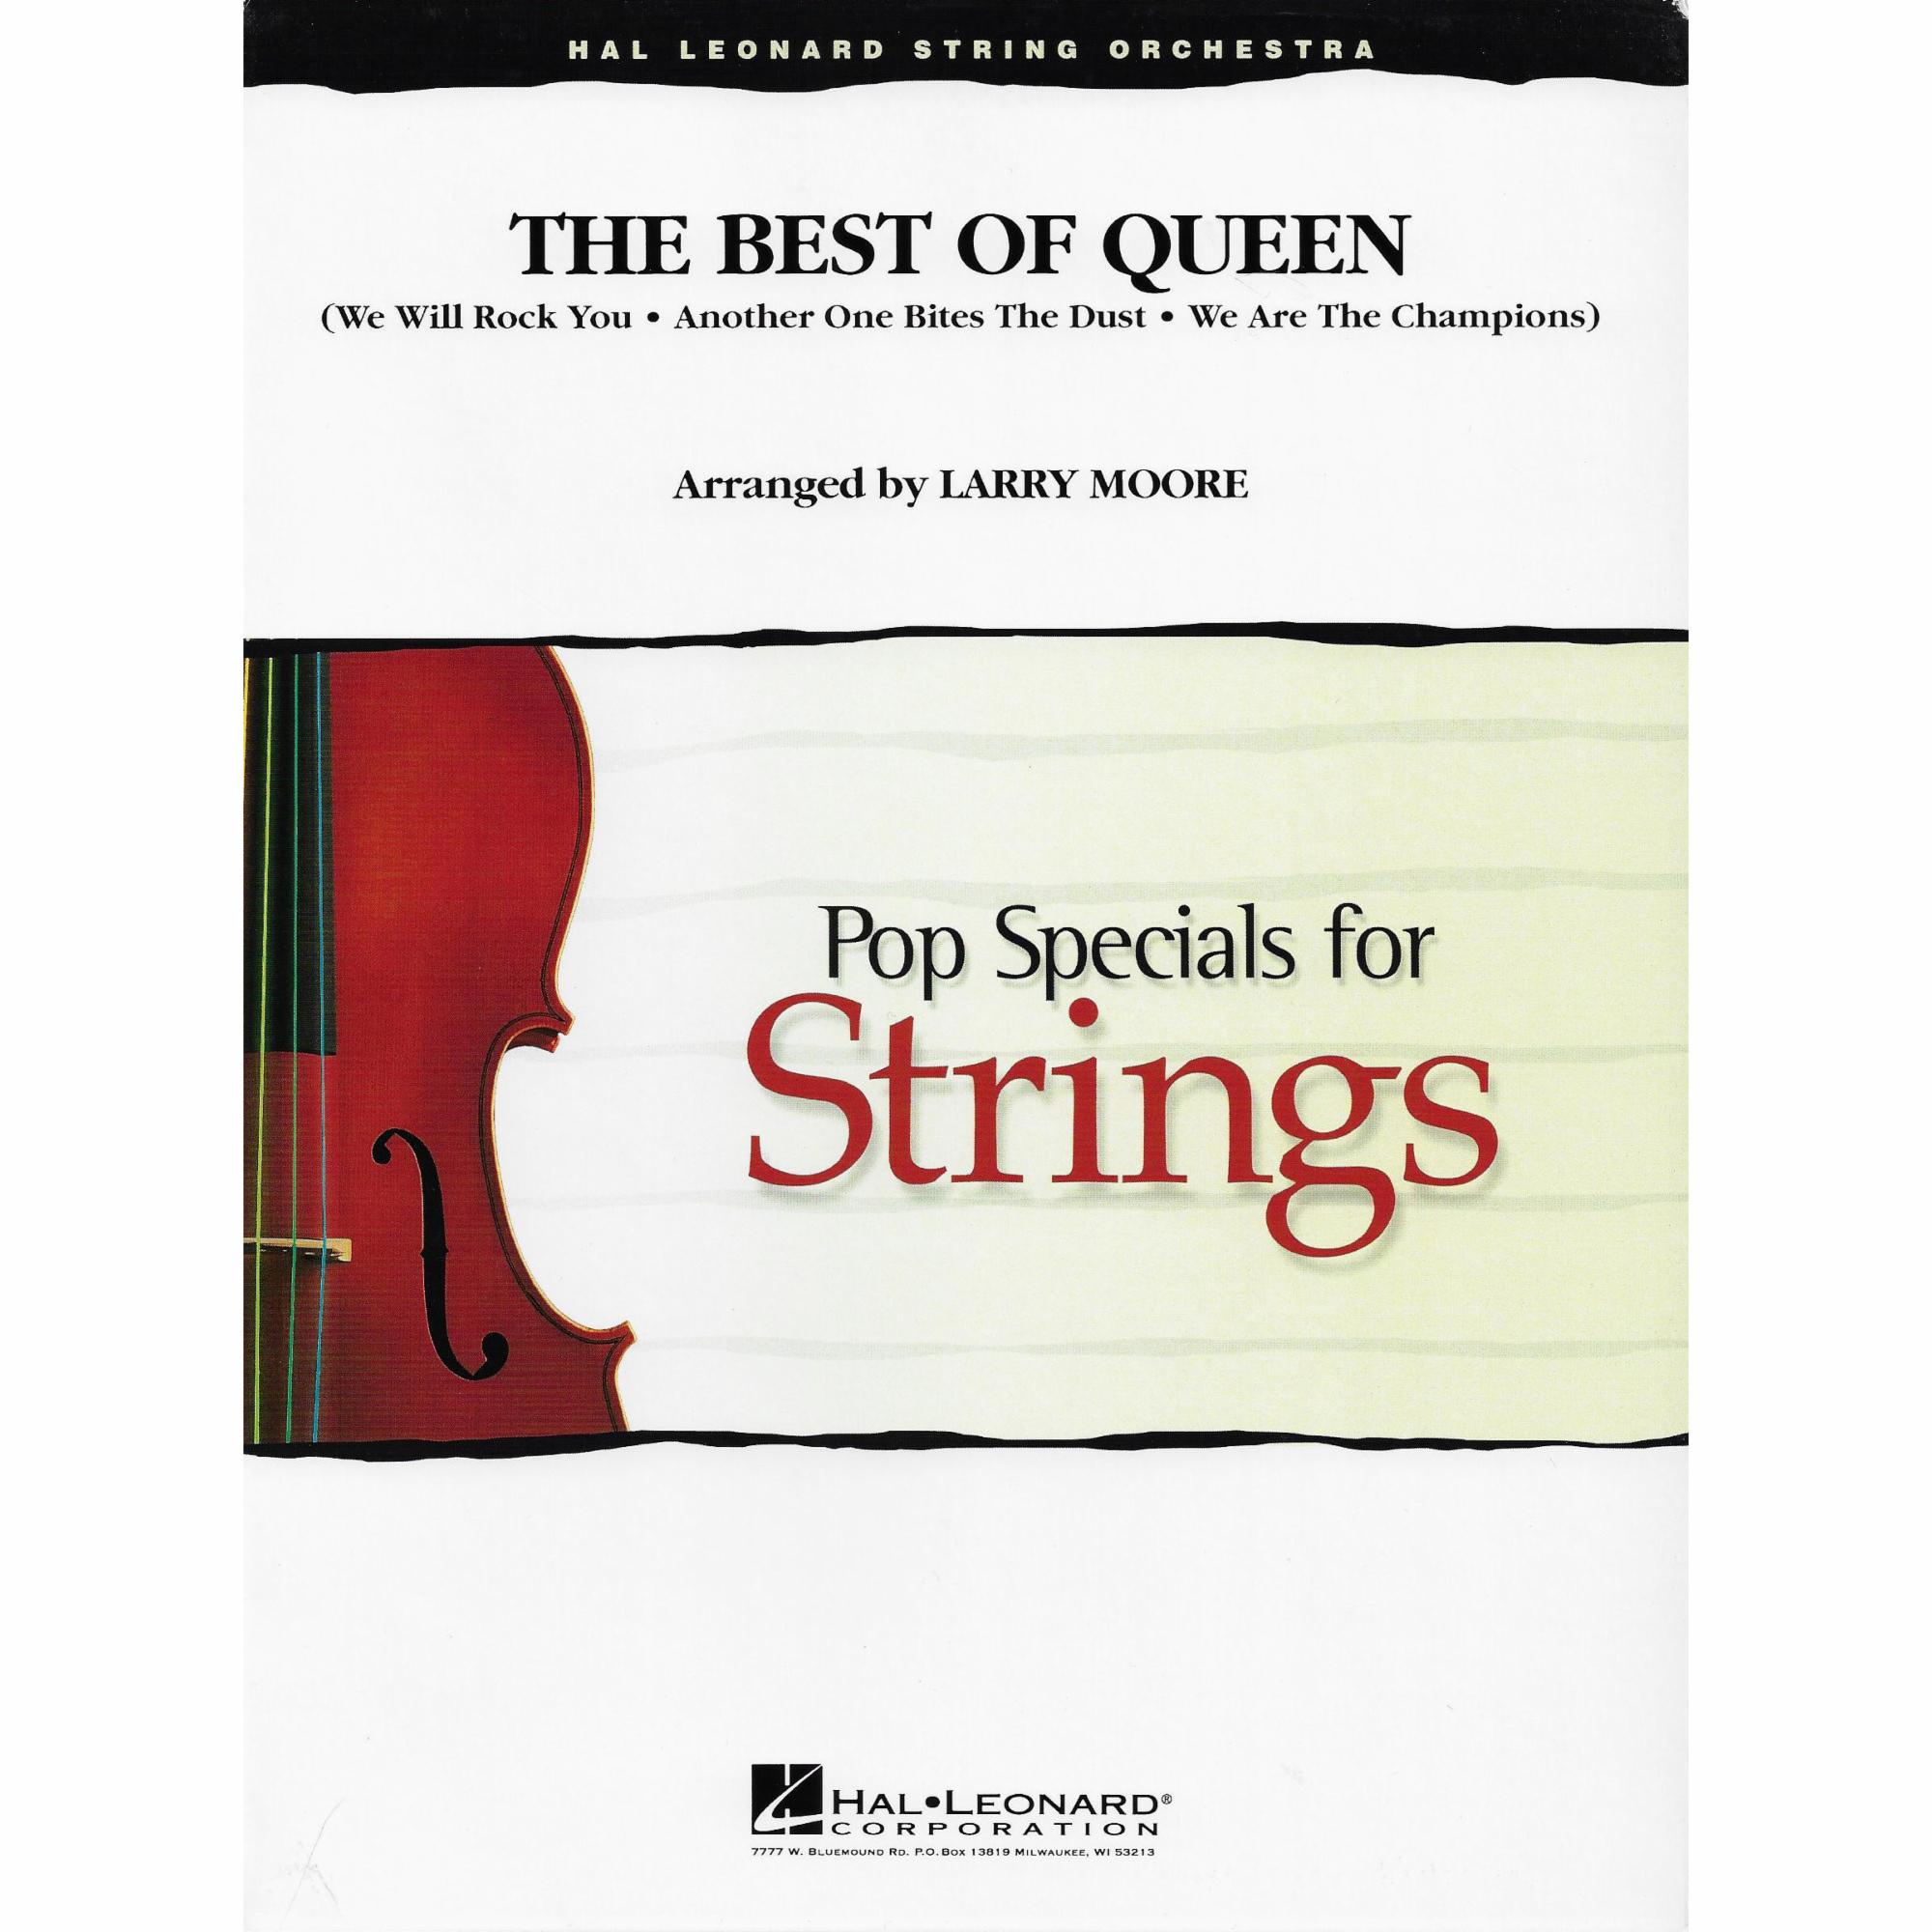 The Best of Queen for String Orchestra